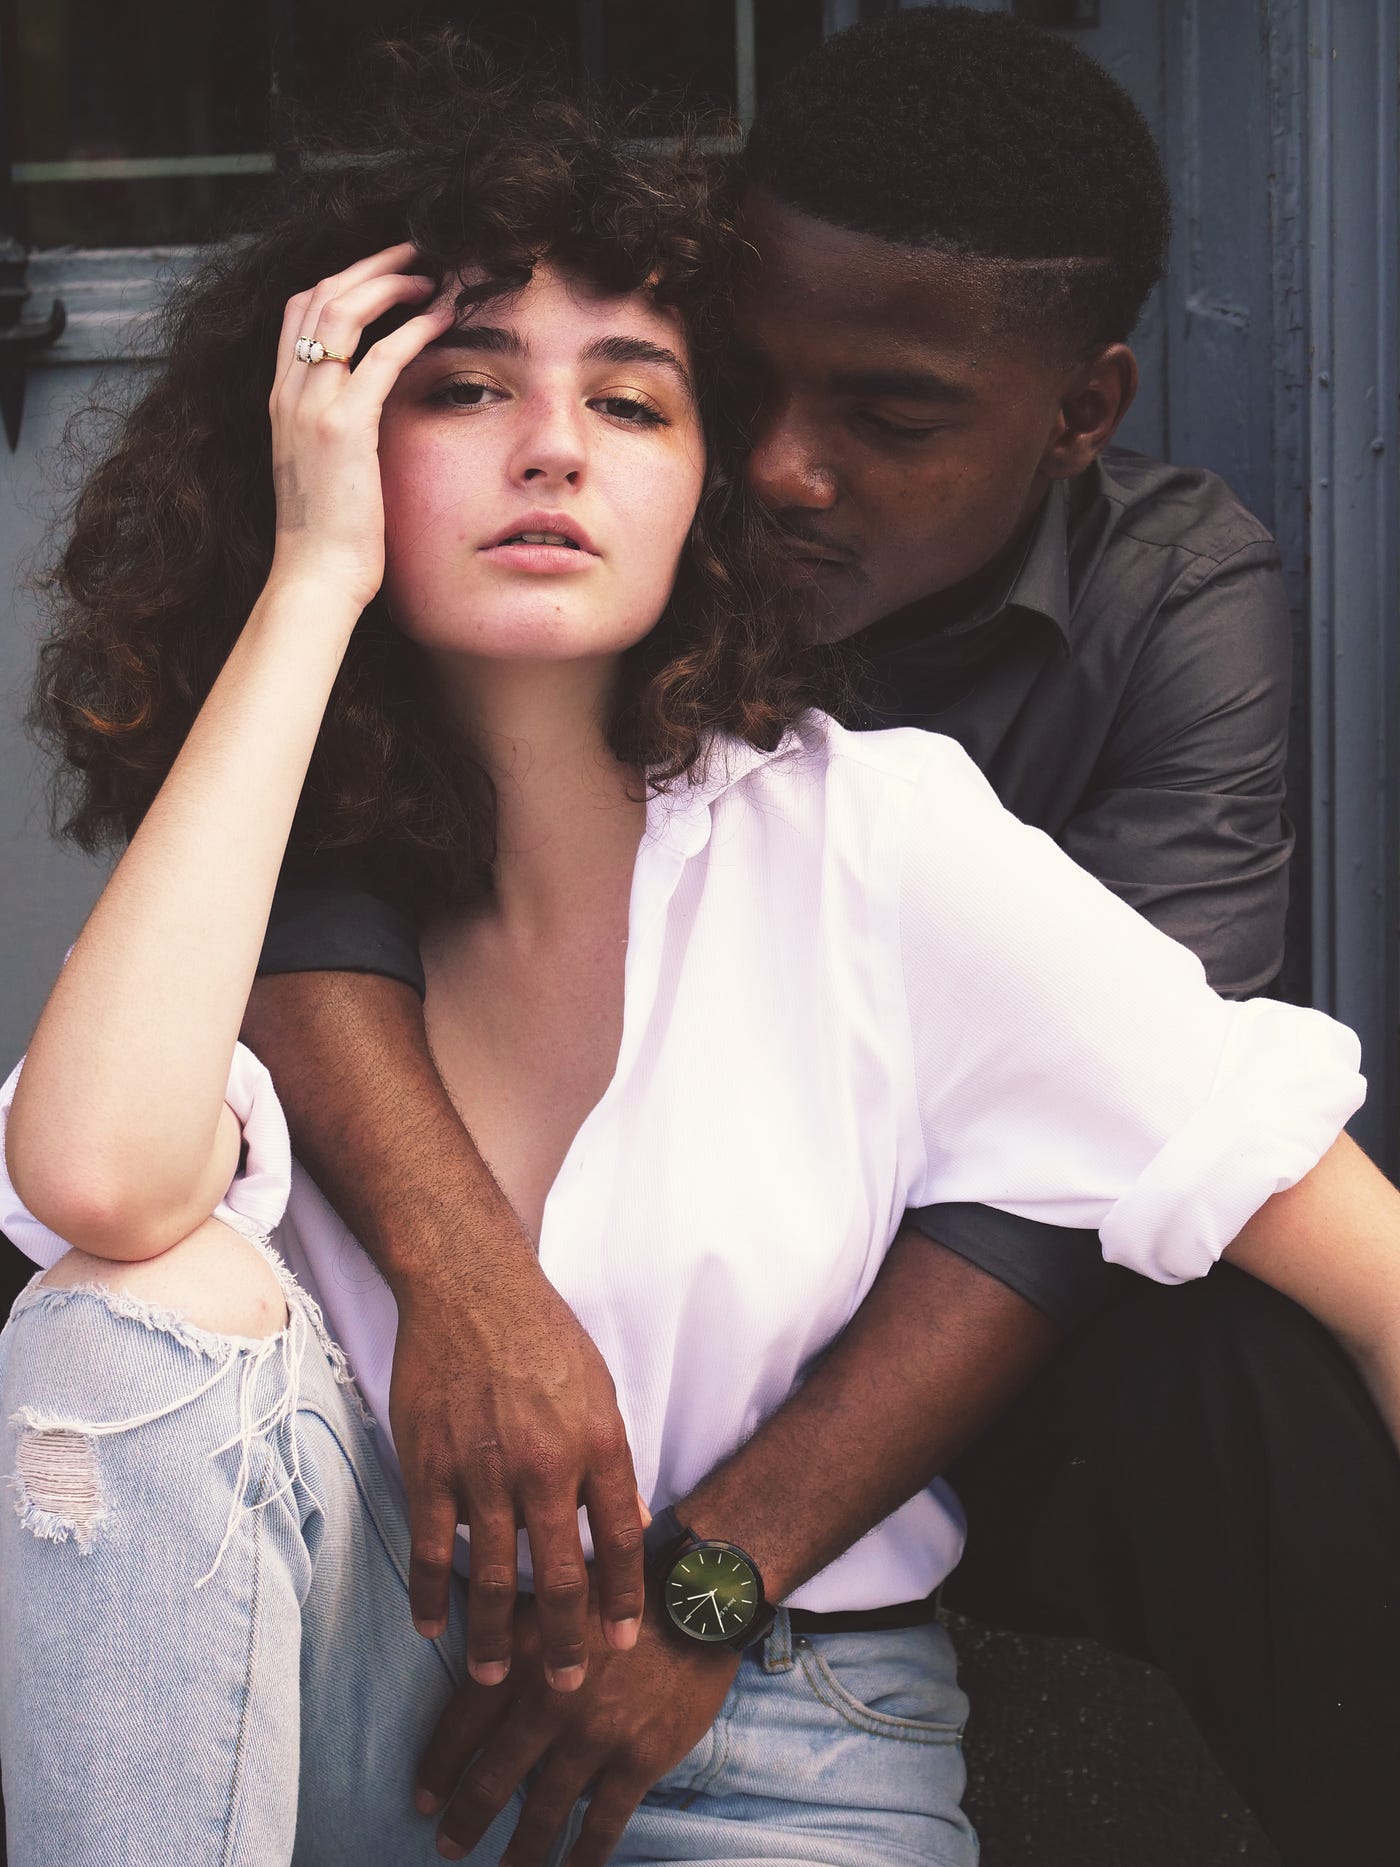 You People: Interracial Relationship Fact vs. Fiction